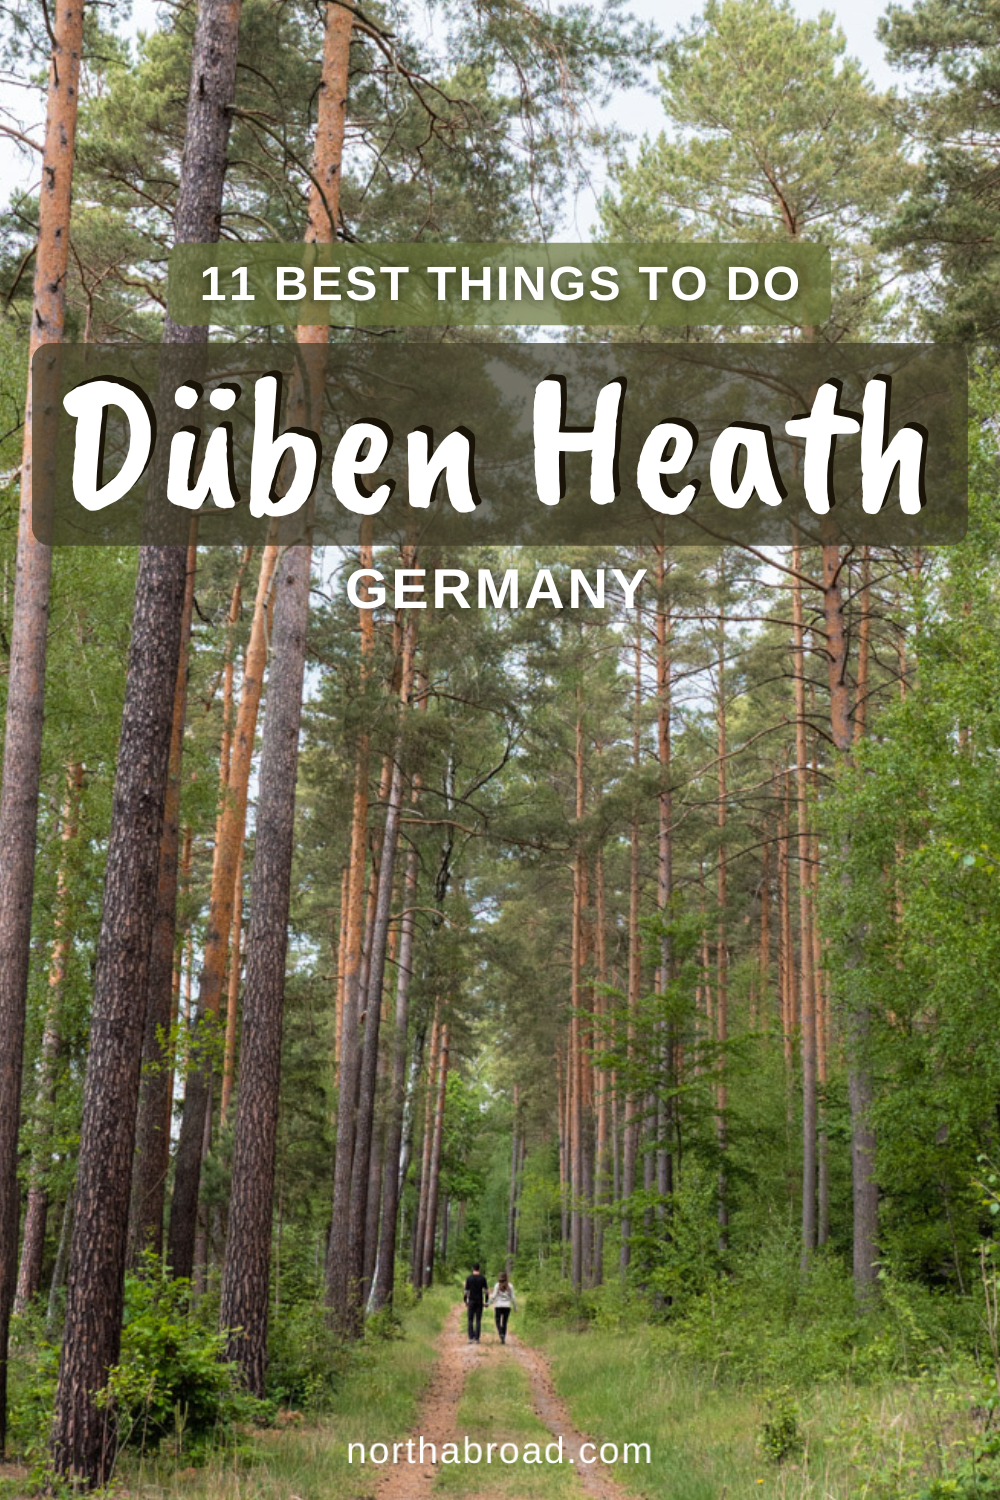 Düben Heath Travel Guide: 11 Best Things To Do & See